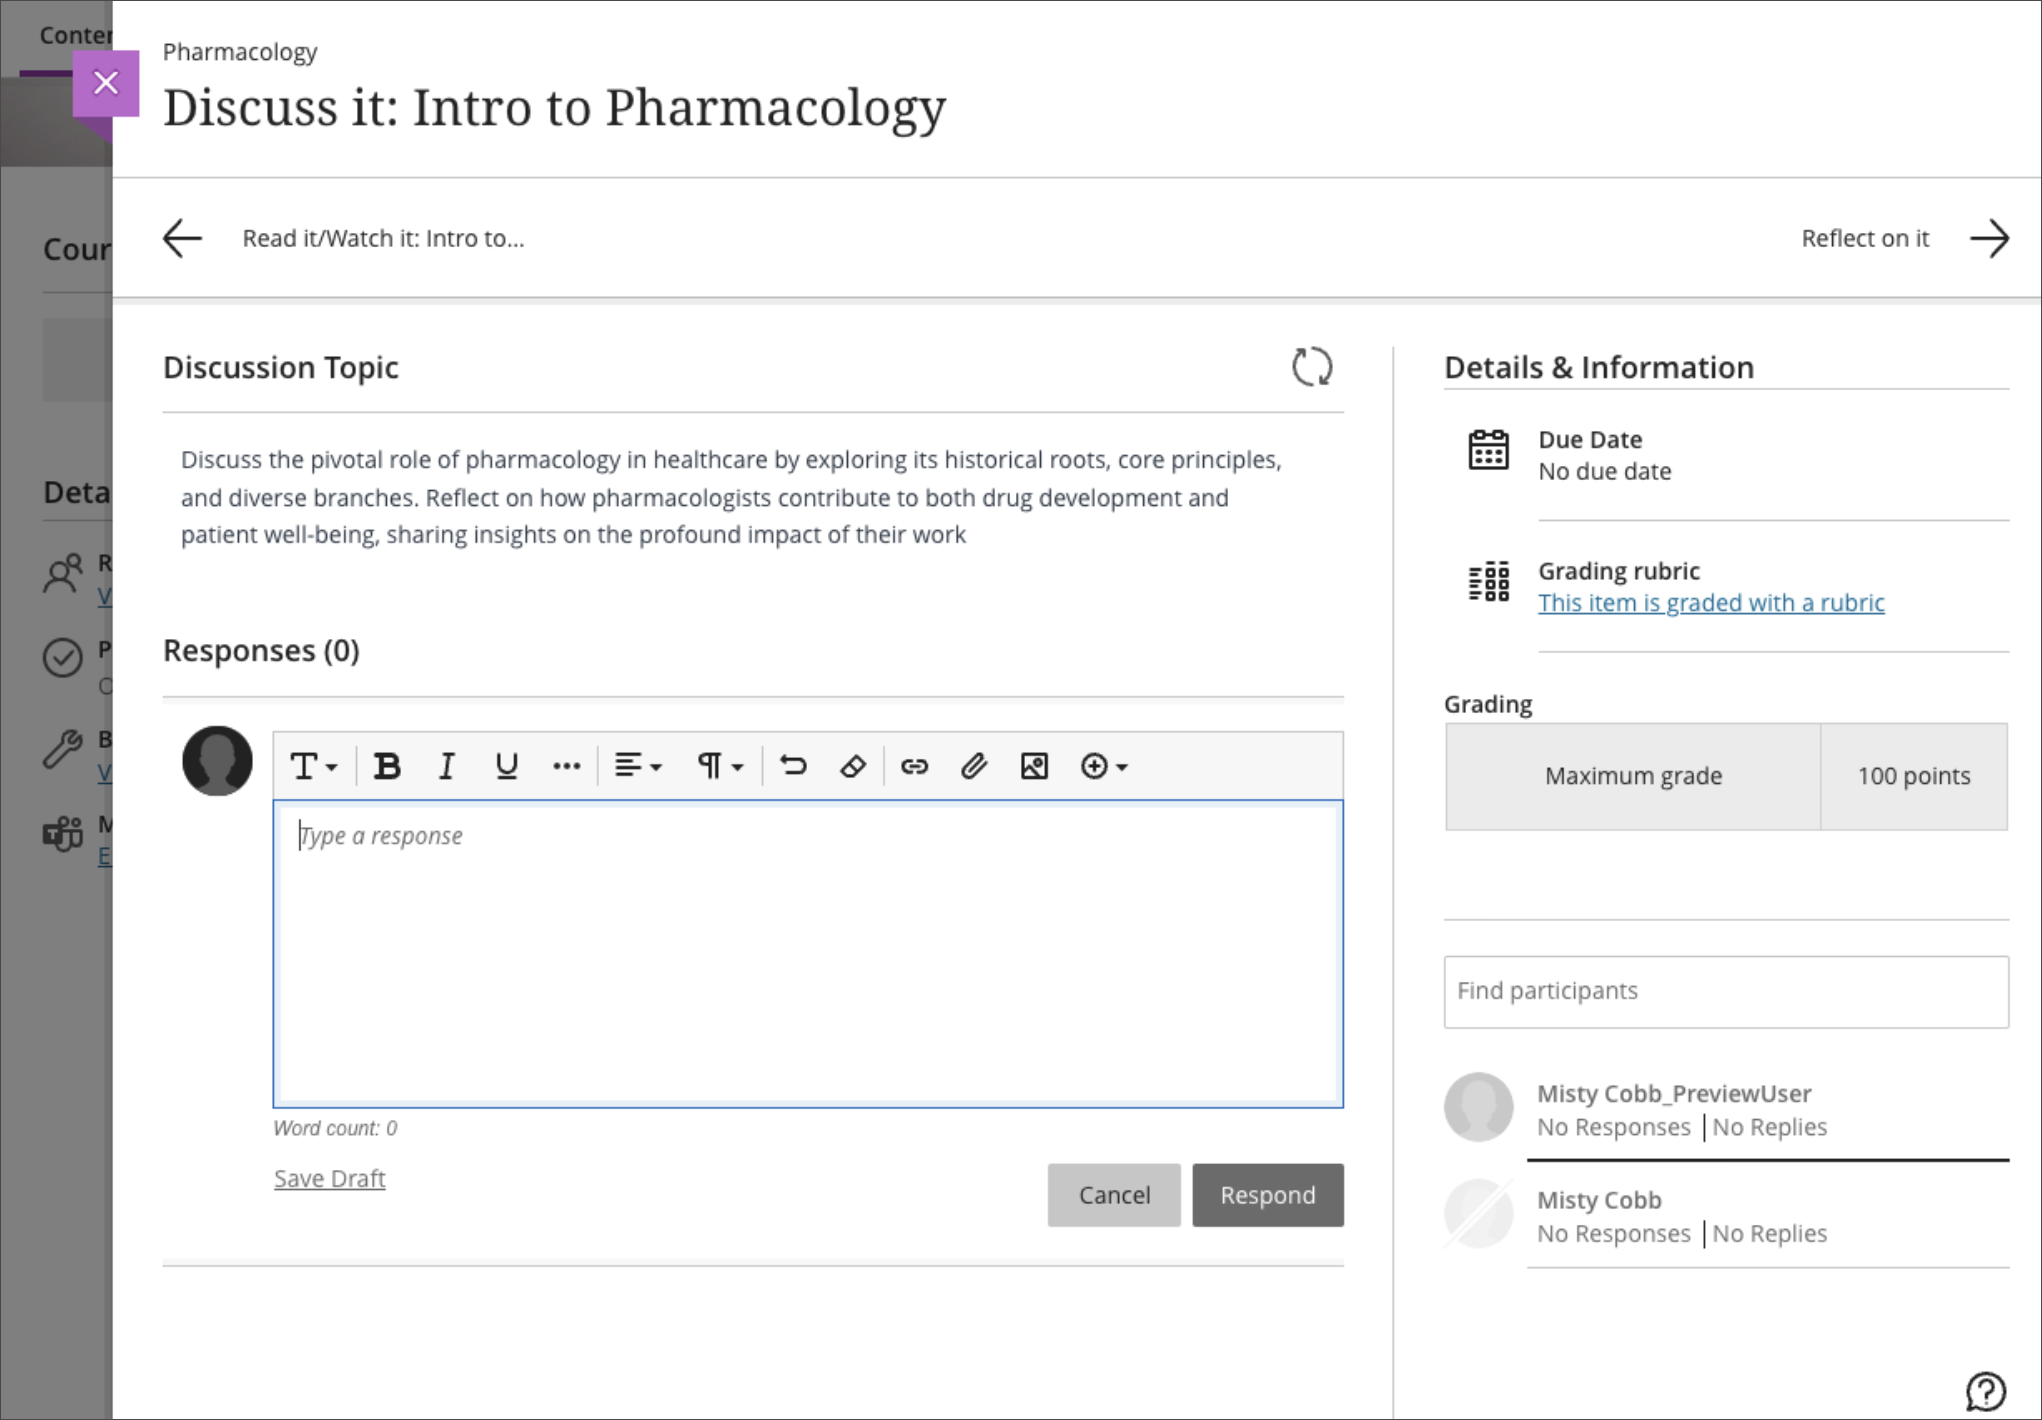 Student view - new image button on content editor for discussion response